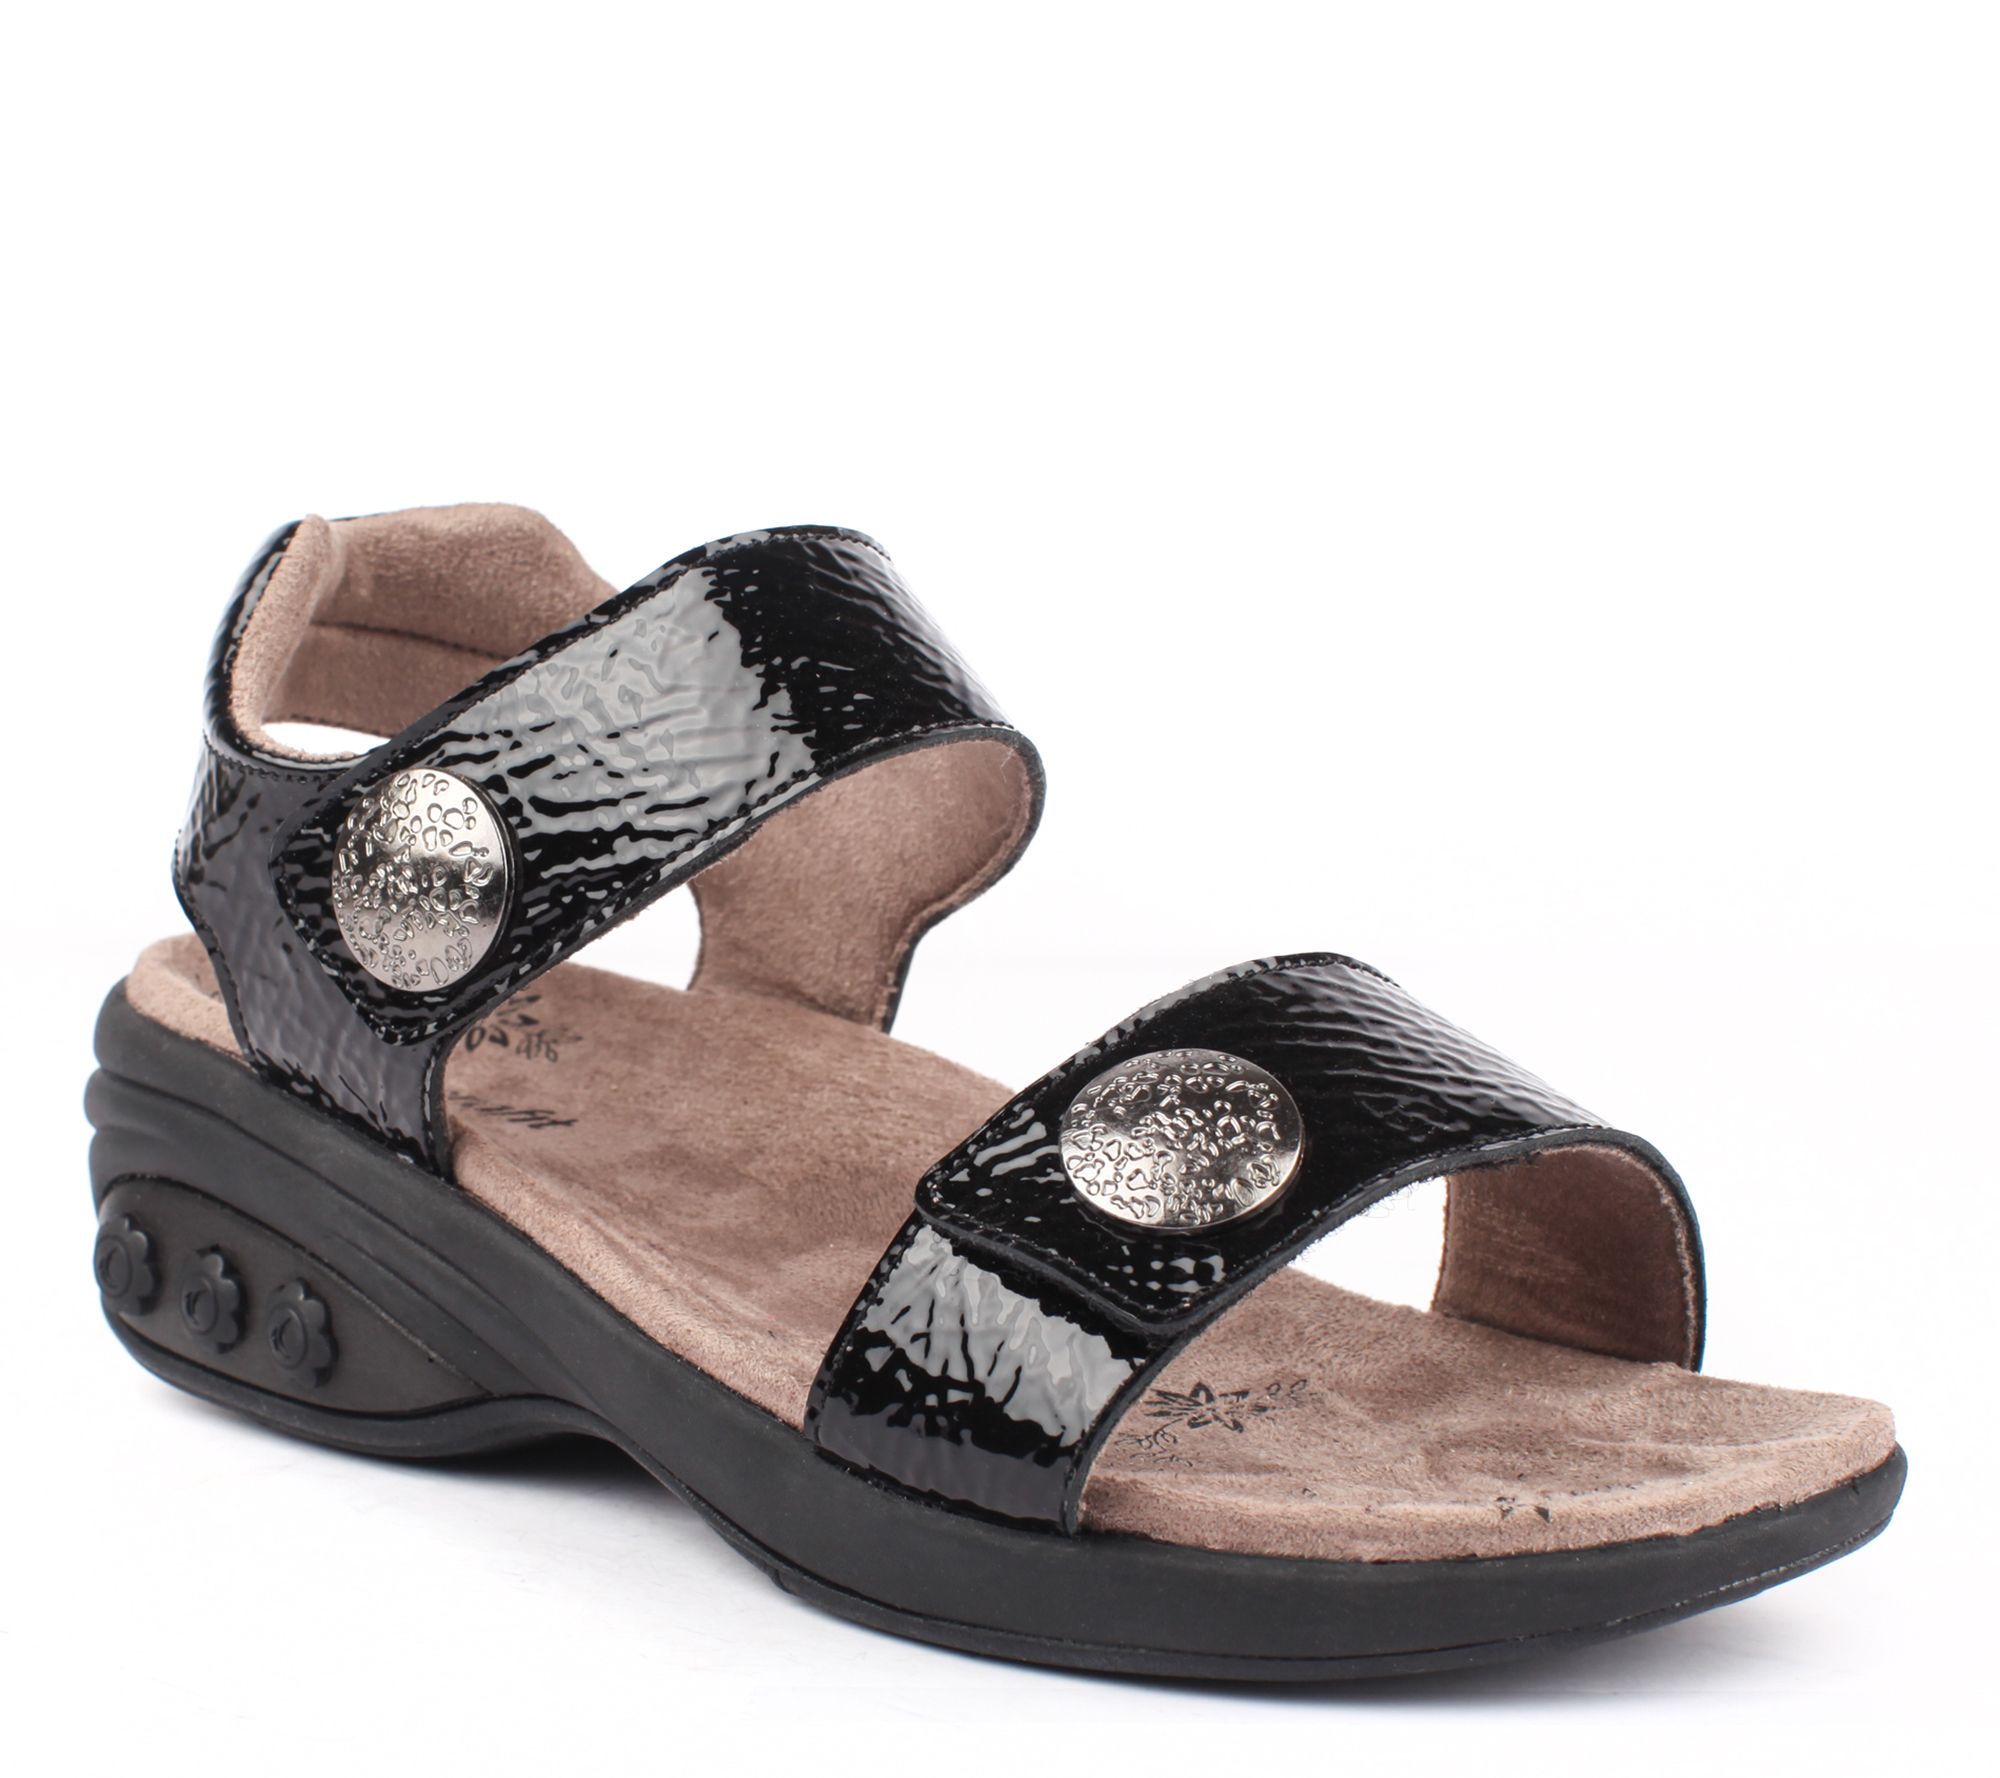 Therafit Leather Sandals - Melody - QVC.com